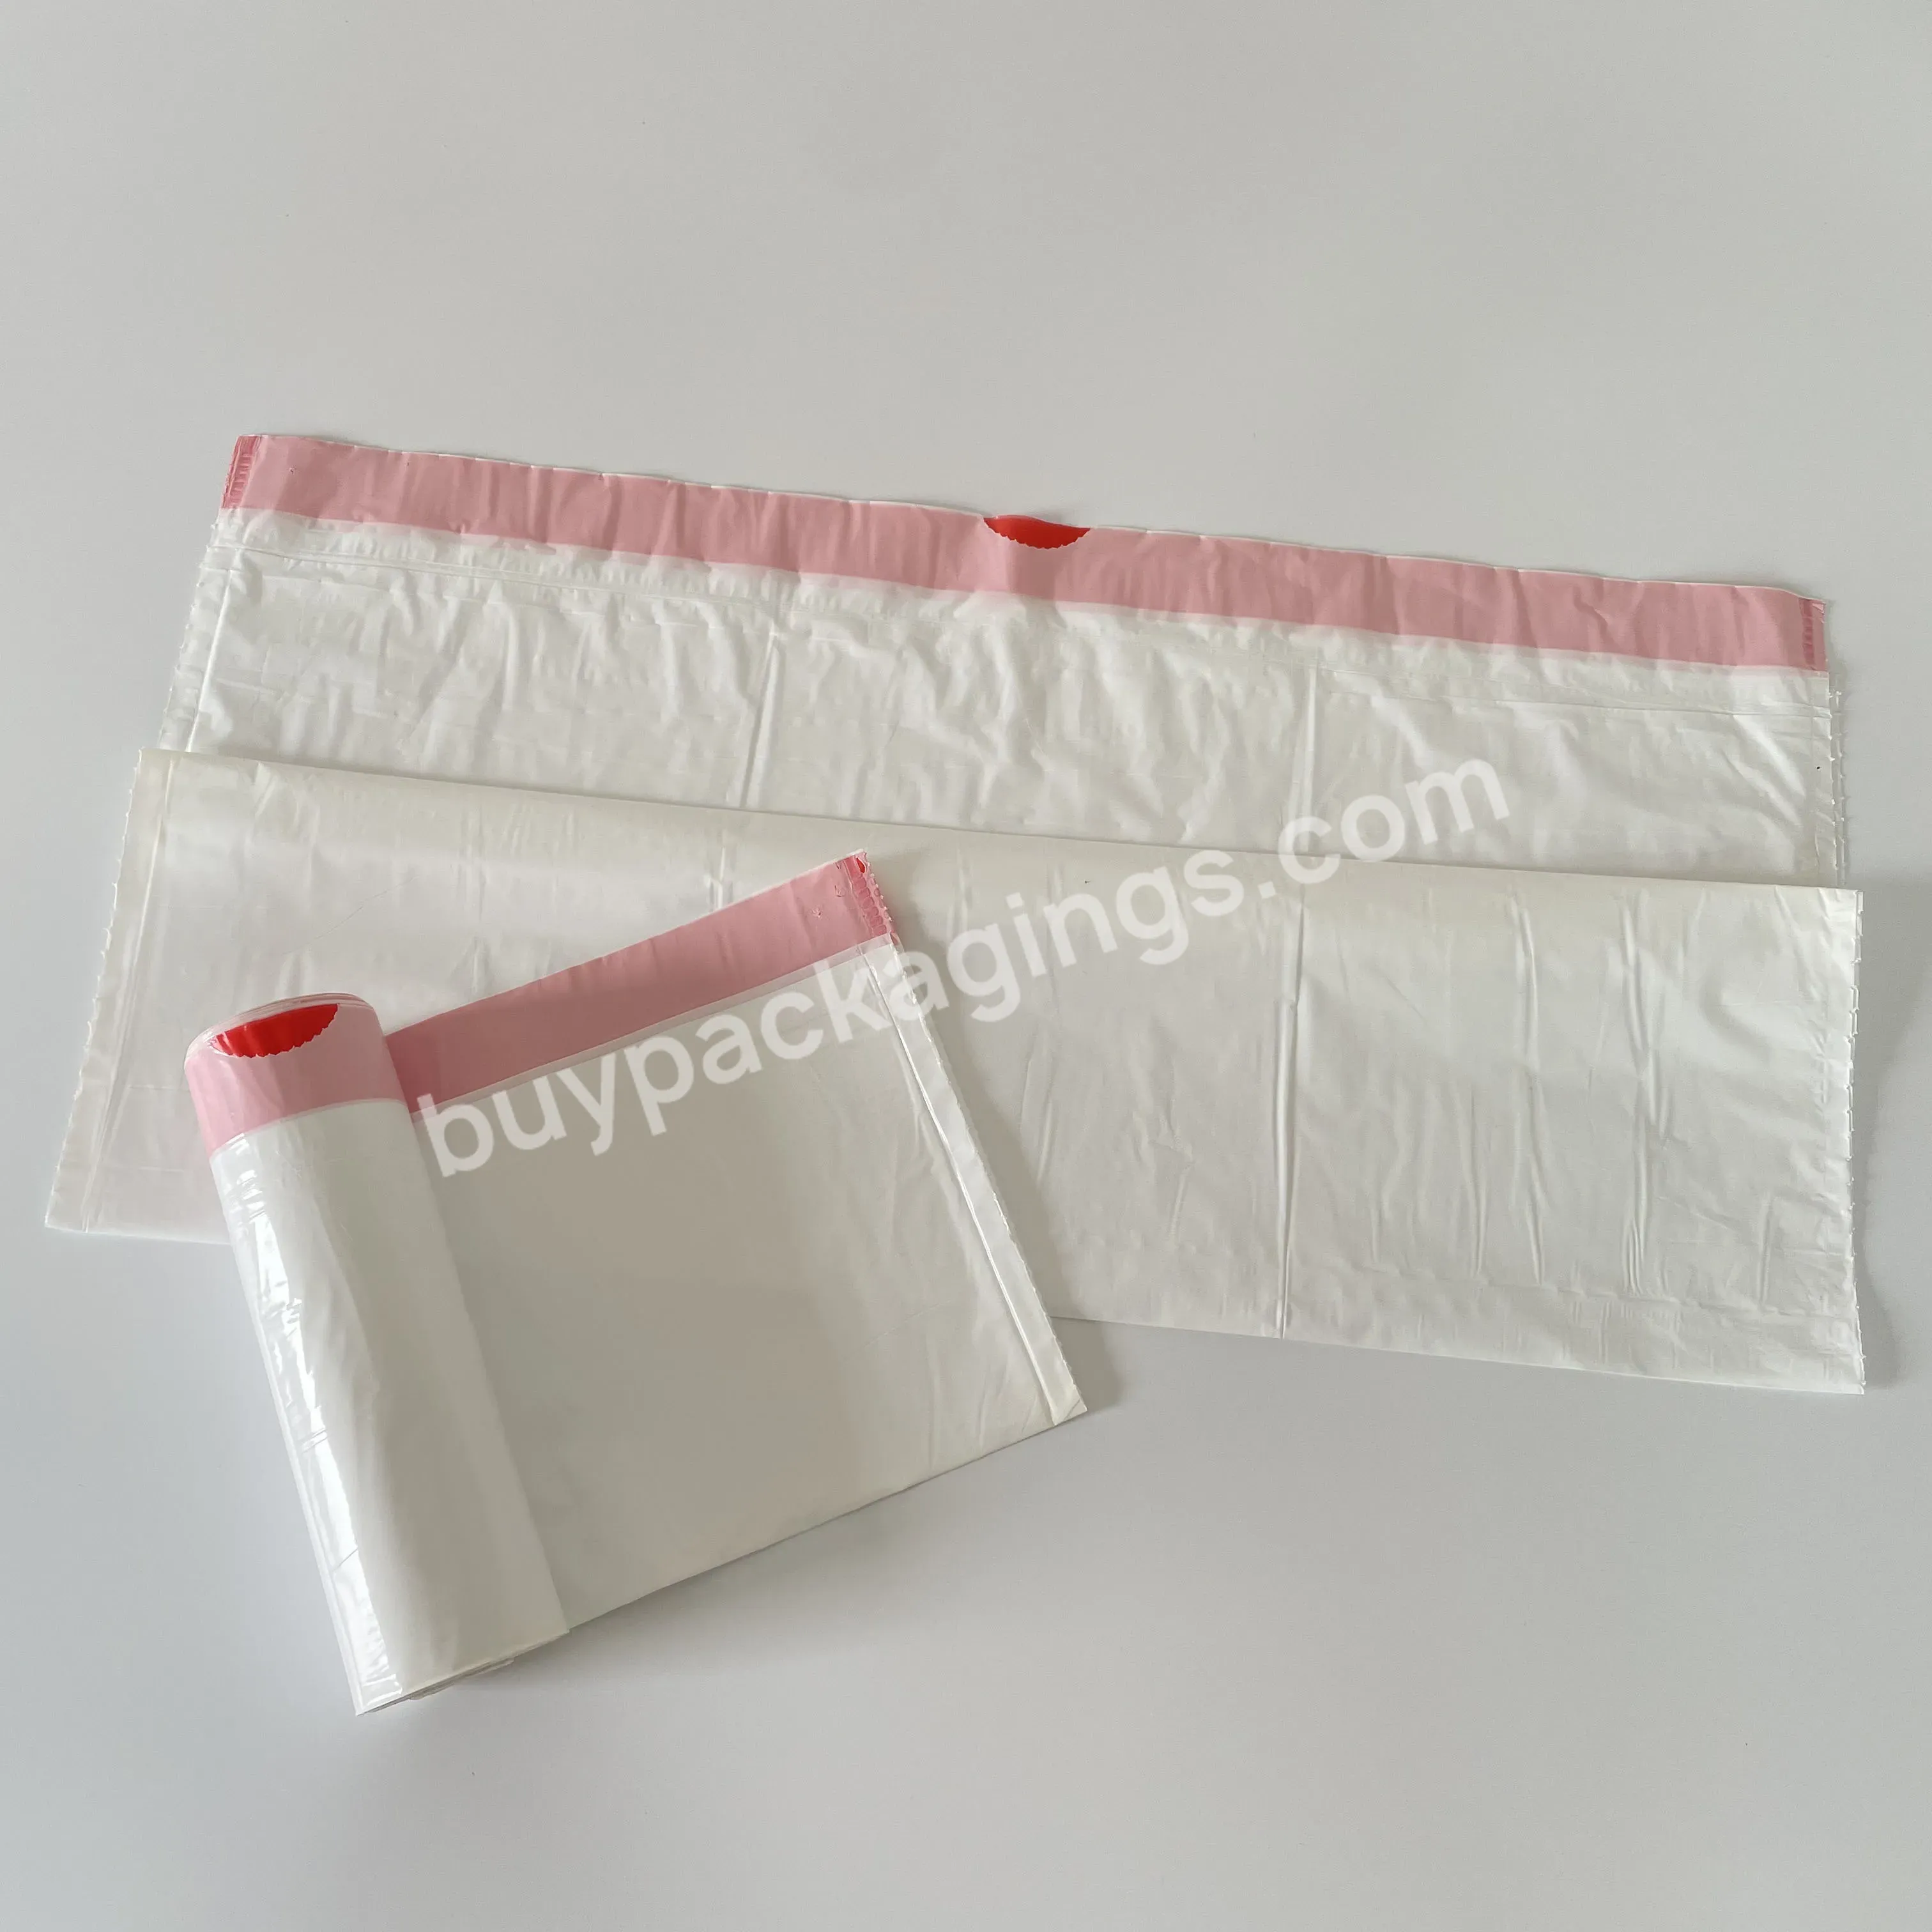 Disposable Garbage Bags Custom Packaging Box Outside Customized Eco Friendly Biodegradable Trash Bag - Buy Customized Eco Friendly Biodegradable Trash Bag,Garbage Bags,Custom Packaging Box.